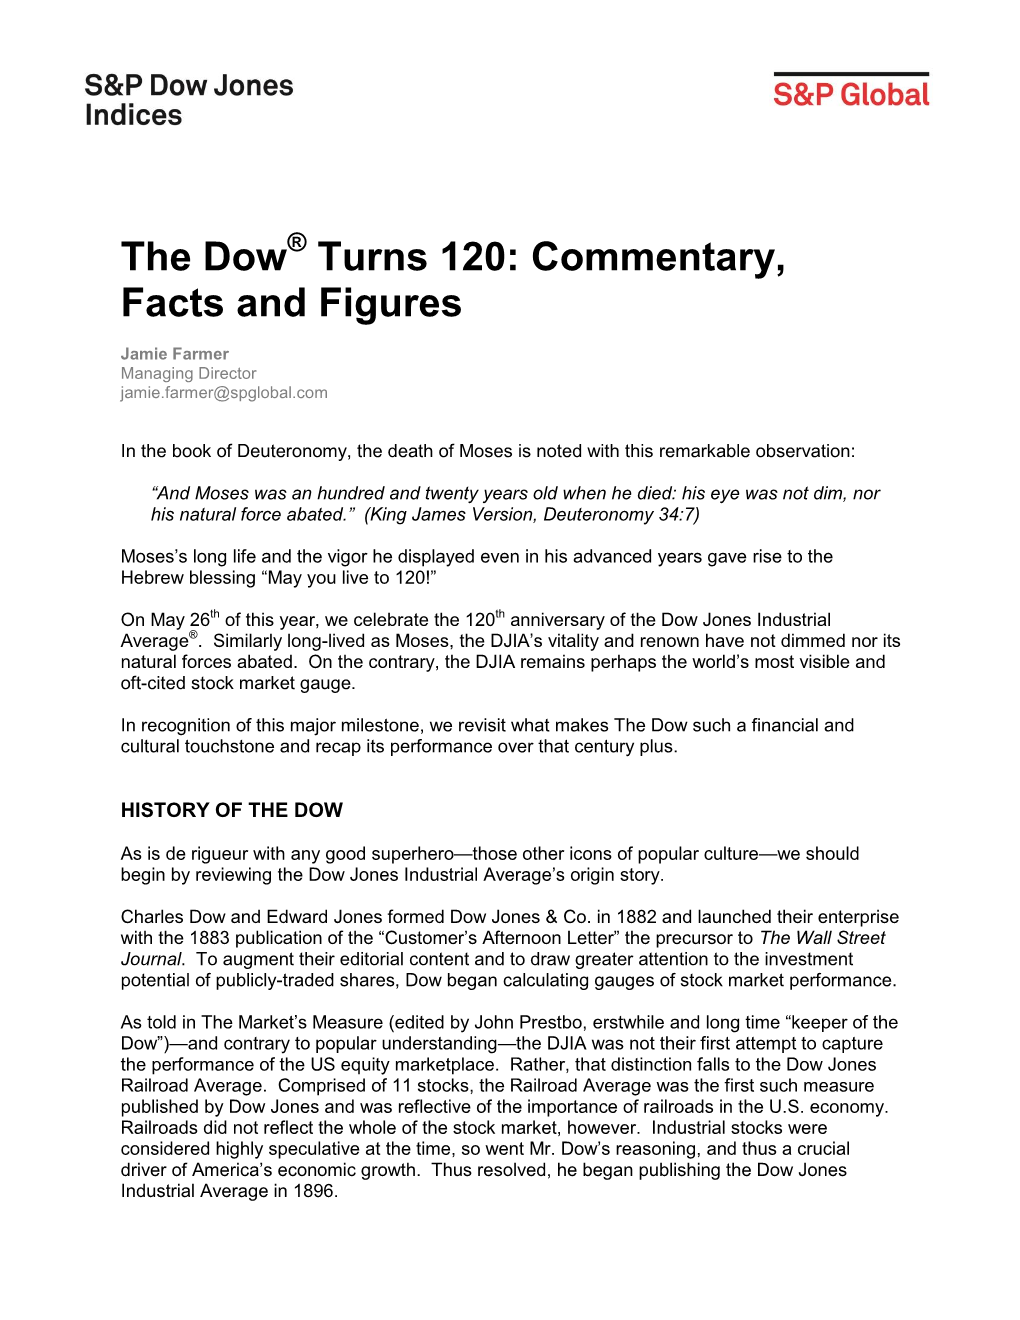 The Dow Turns 120: Commentary, Facts and Figures